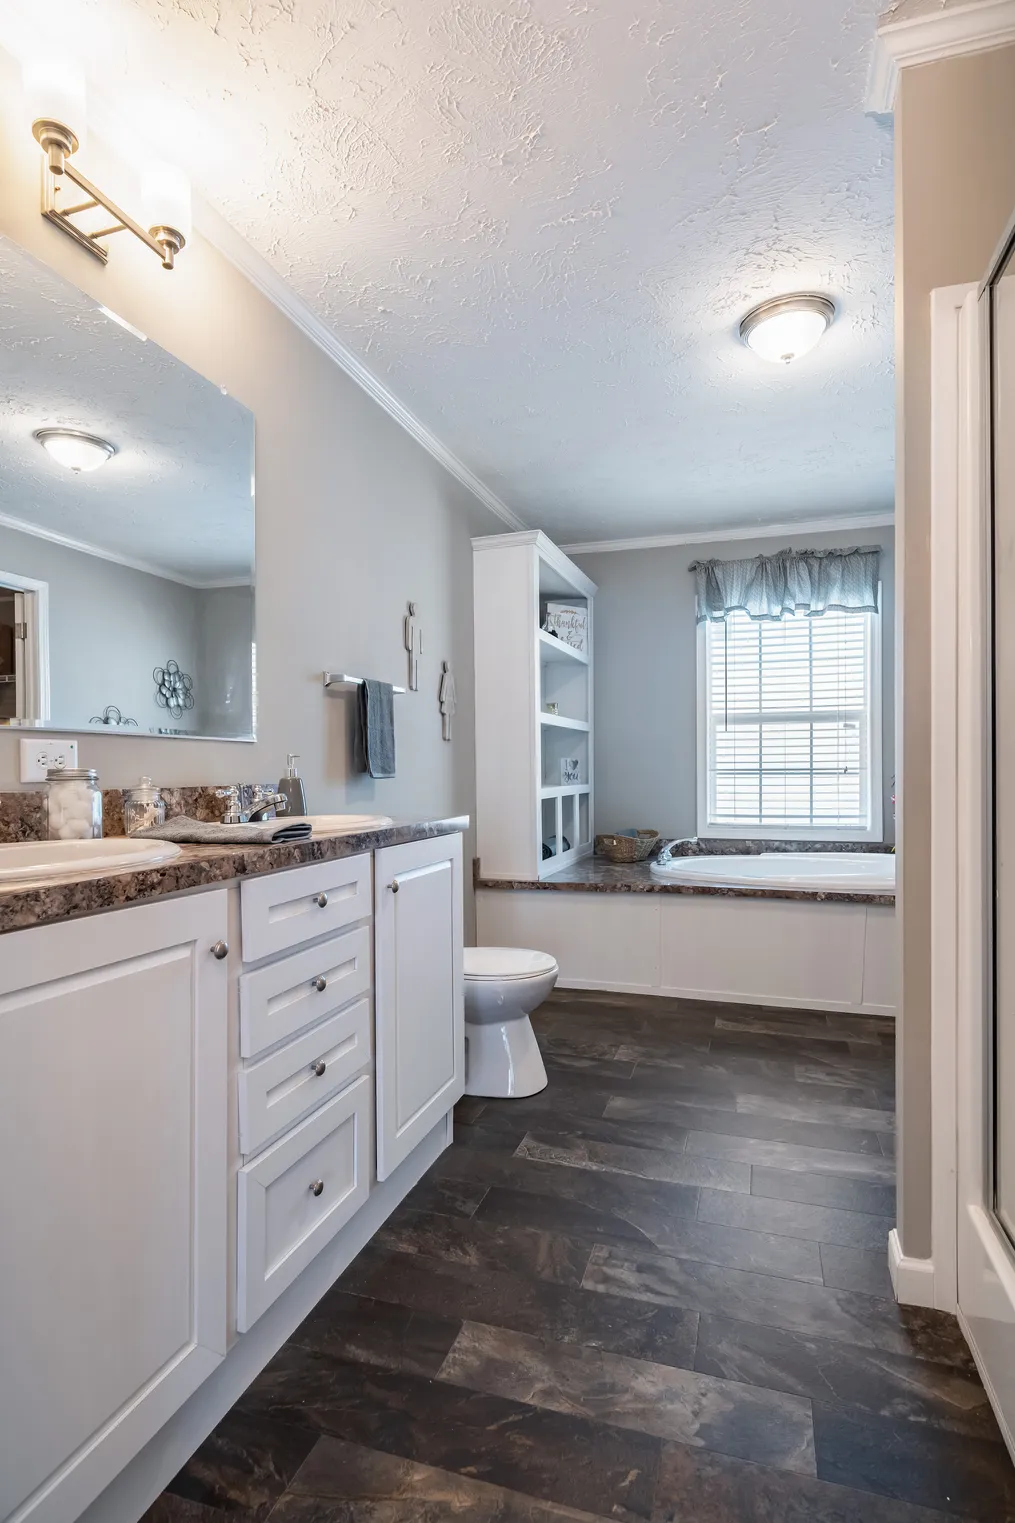 The 4607 ROCKETEER 7 7628 Primary Bathroom. This Manufactured Mobile Home features 4 bedrooms and 2 baths.